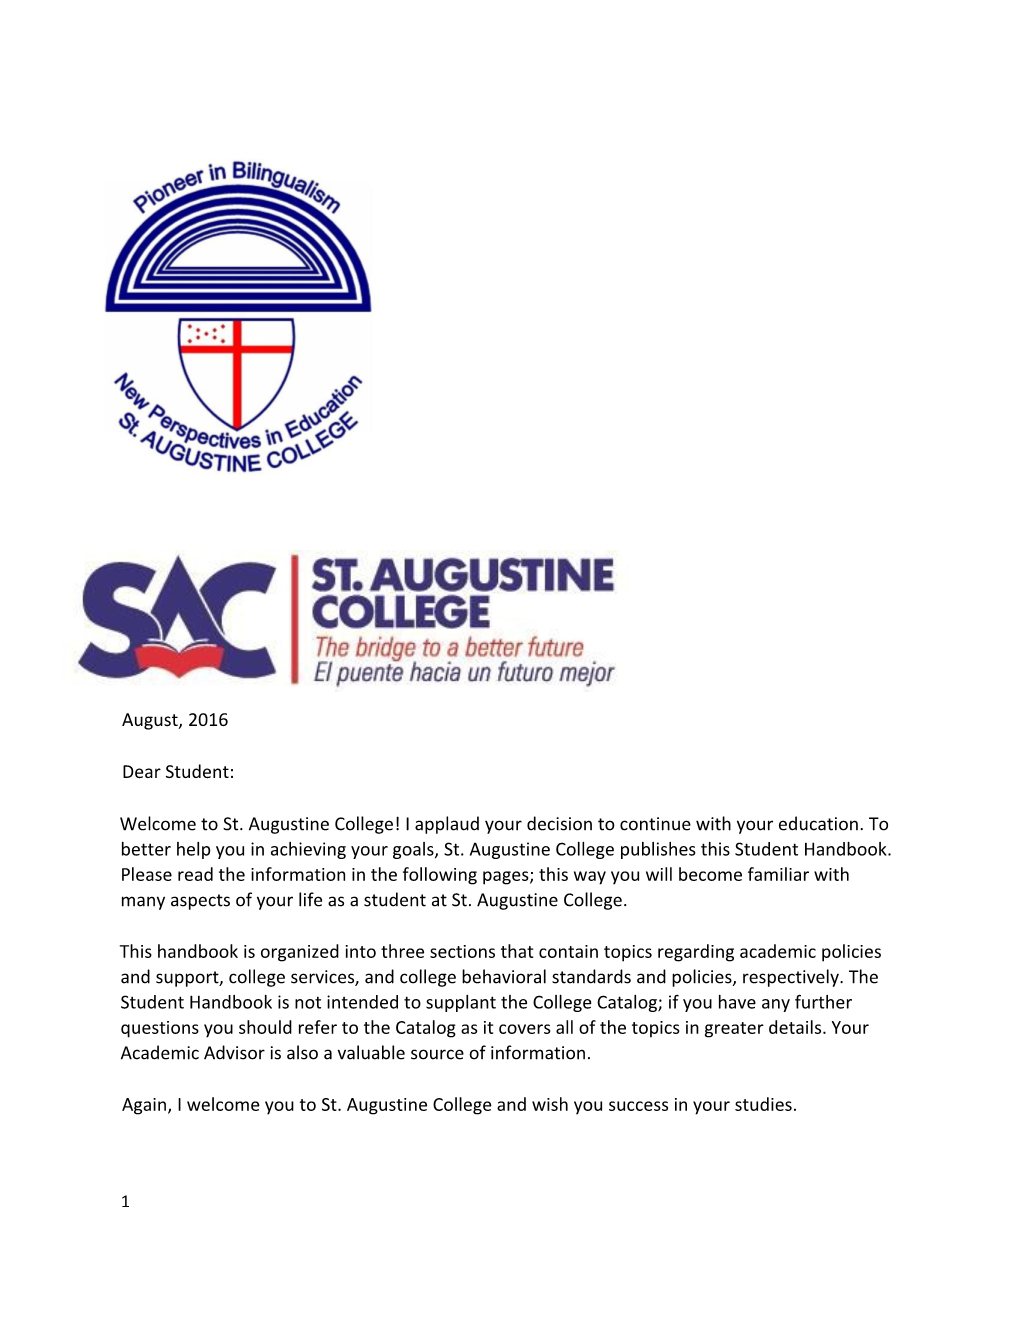 Again, I Welcome You to St. Augustine College and Wish You Success in Your Studies